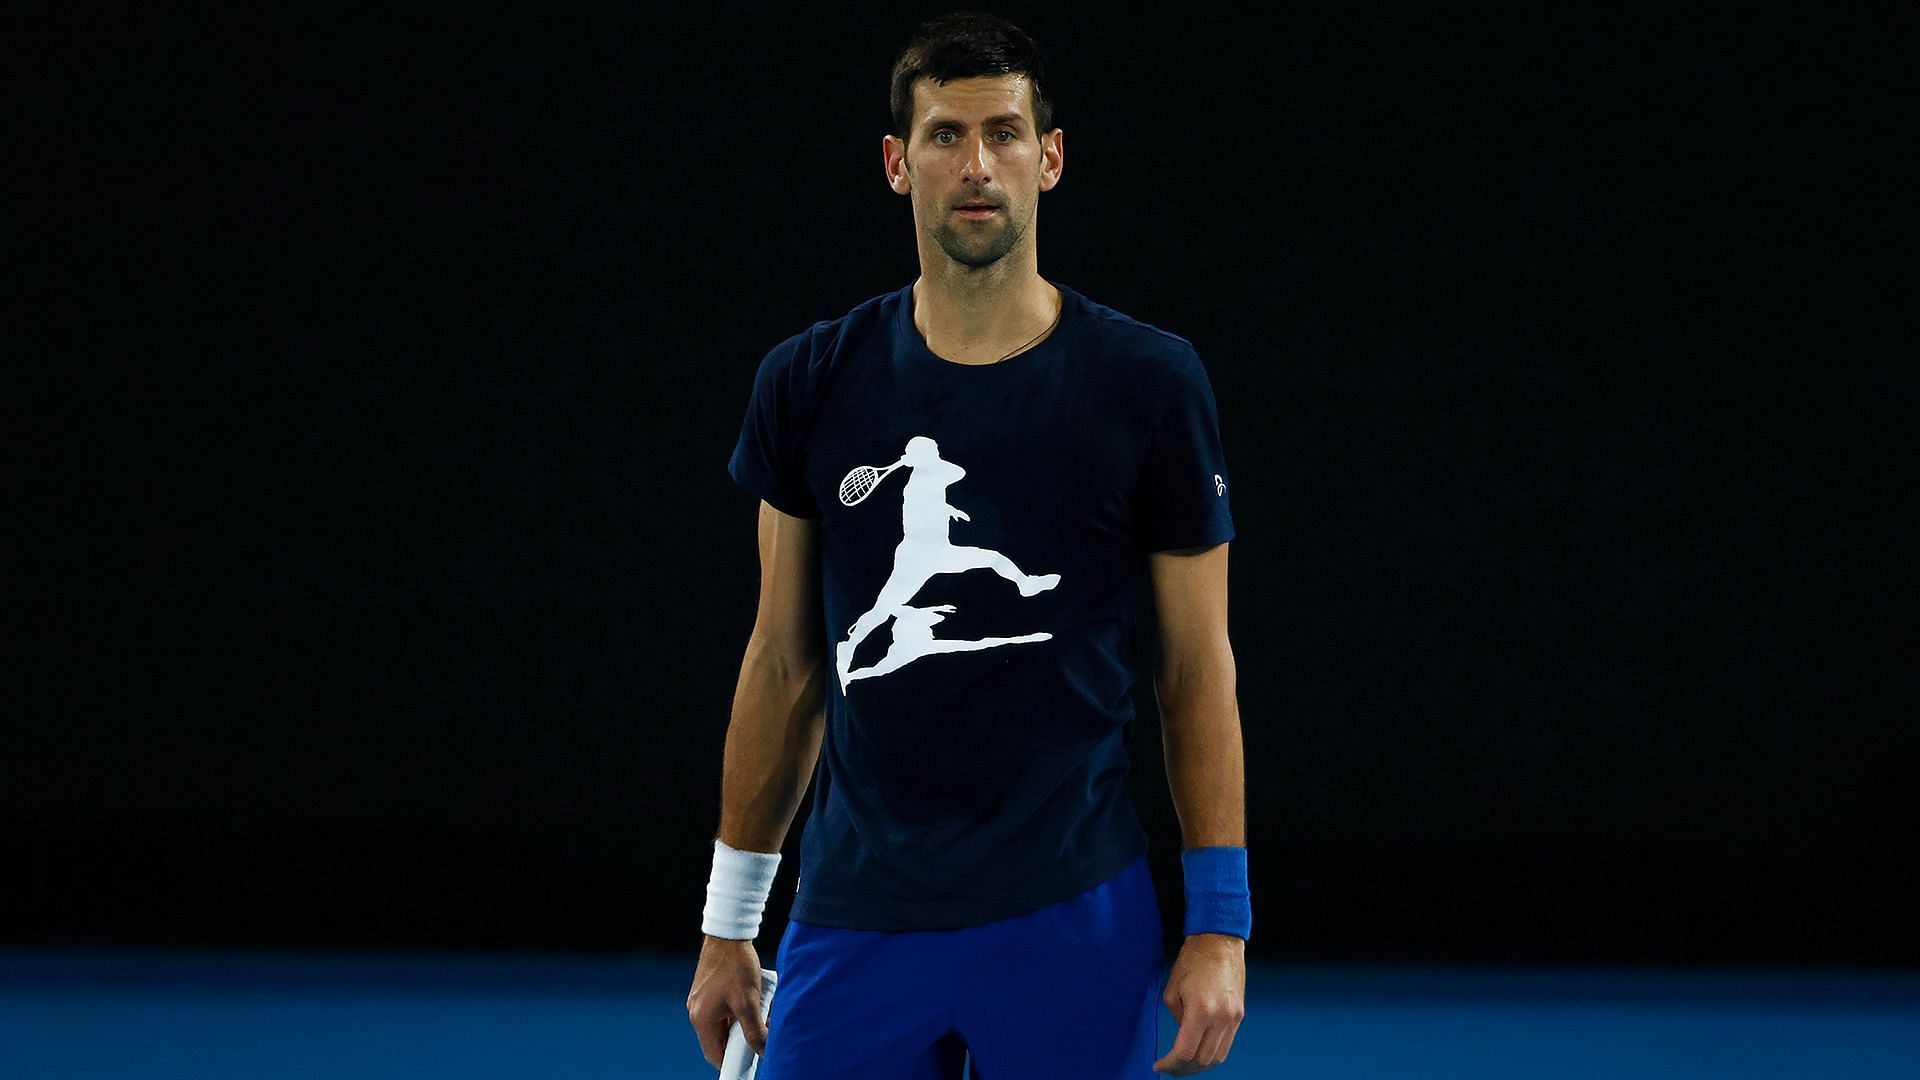 Djokovic has seen a dip in his form of late